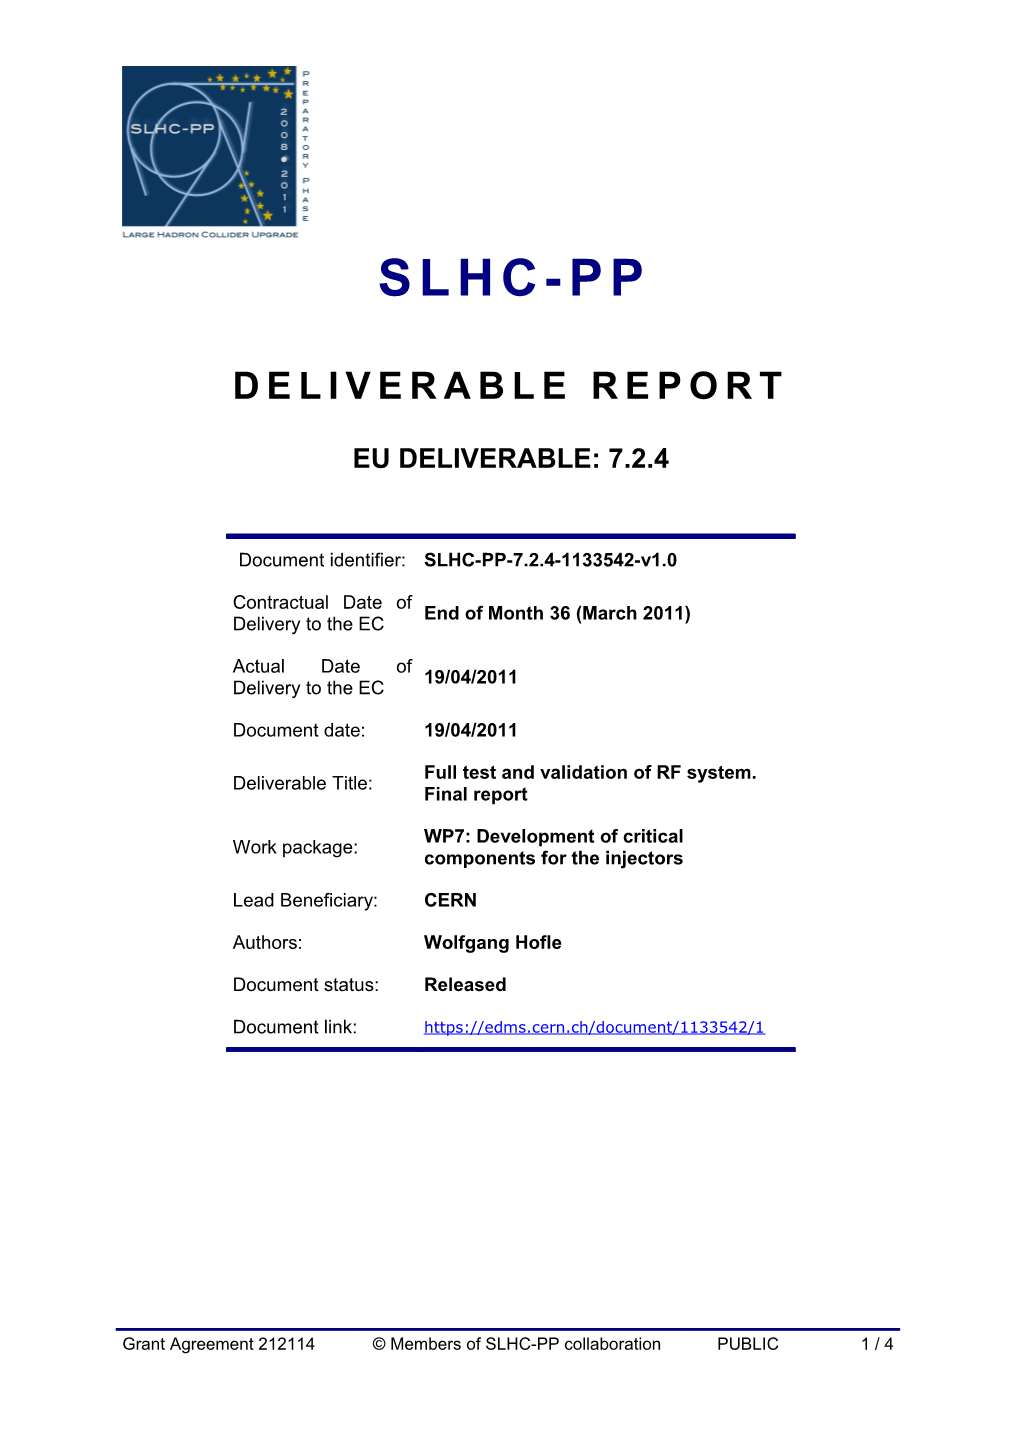 Deliverable Report